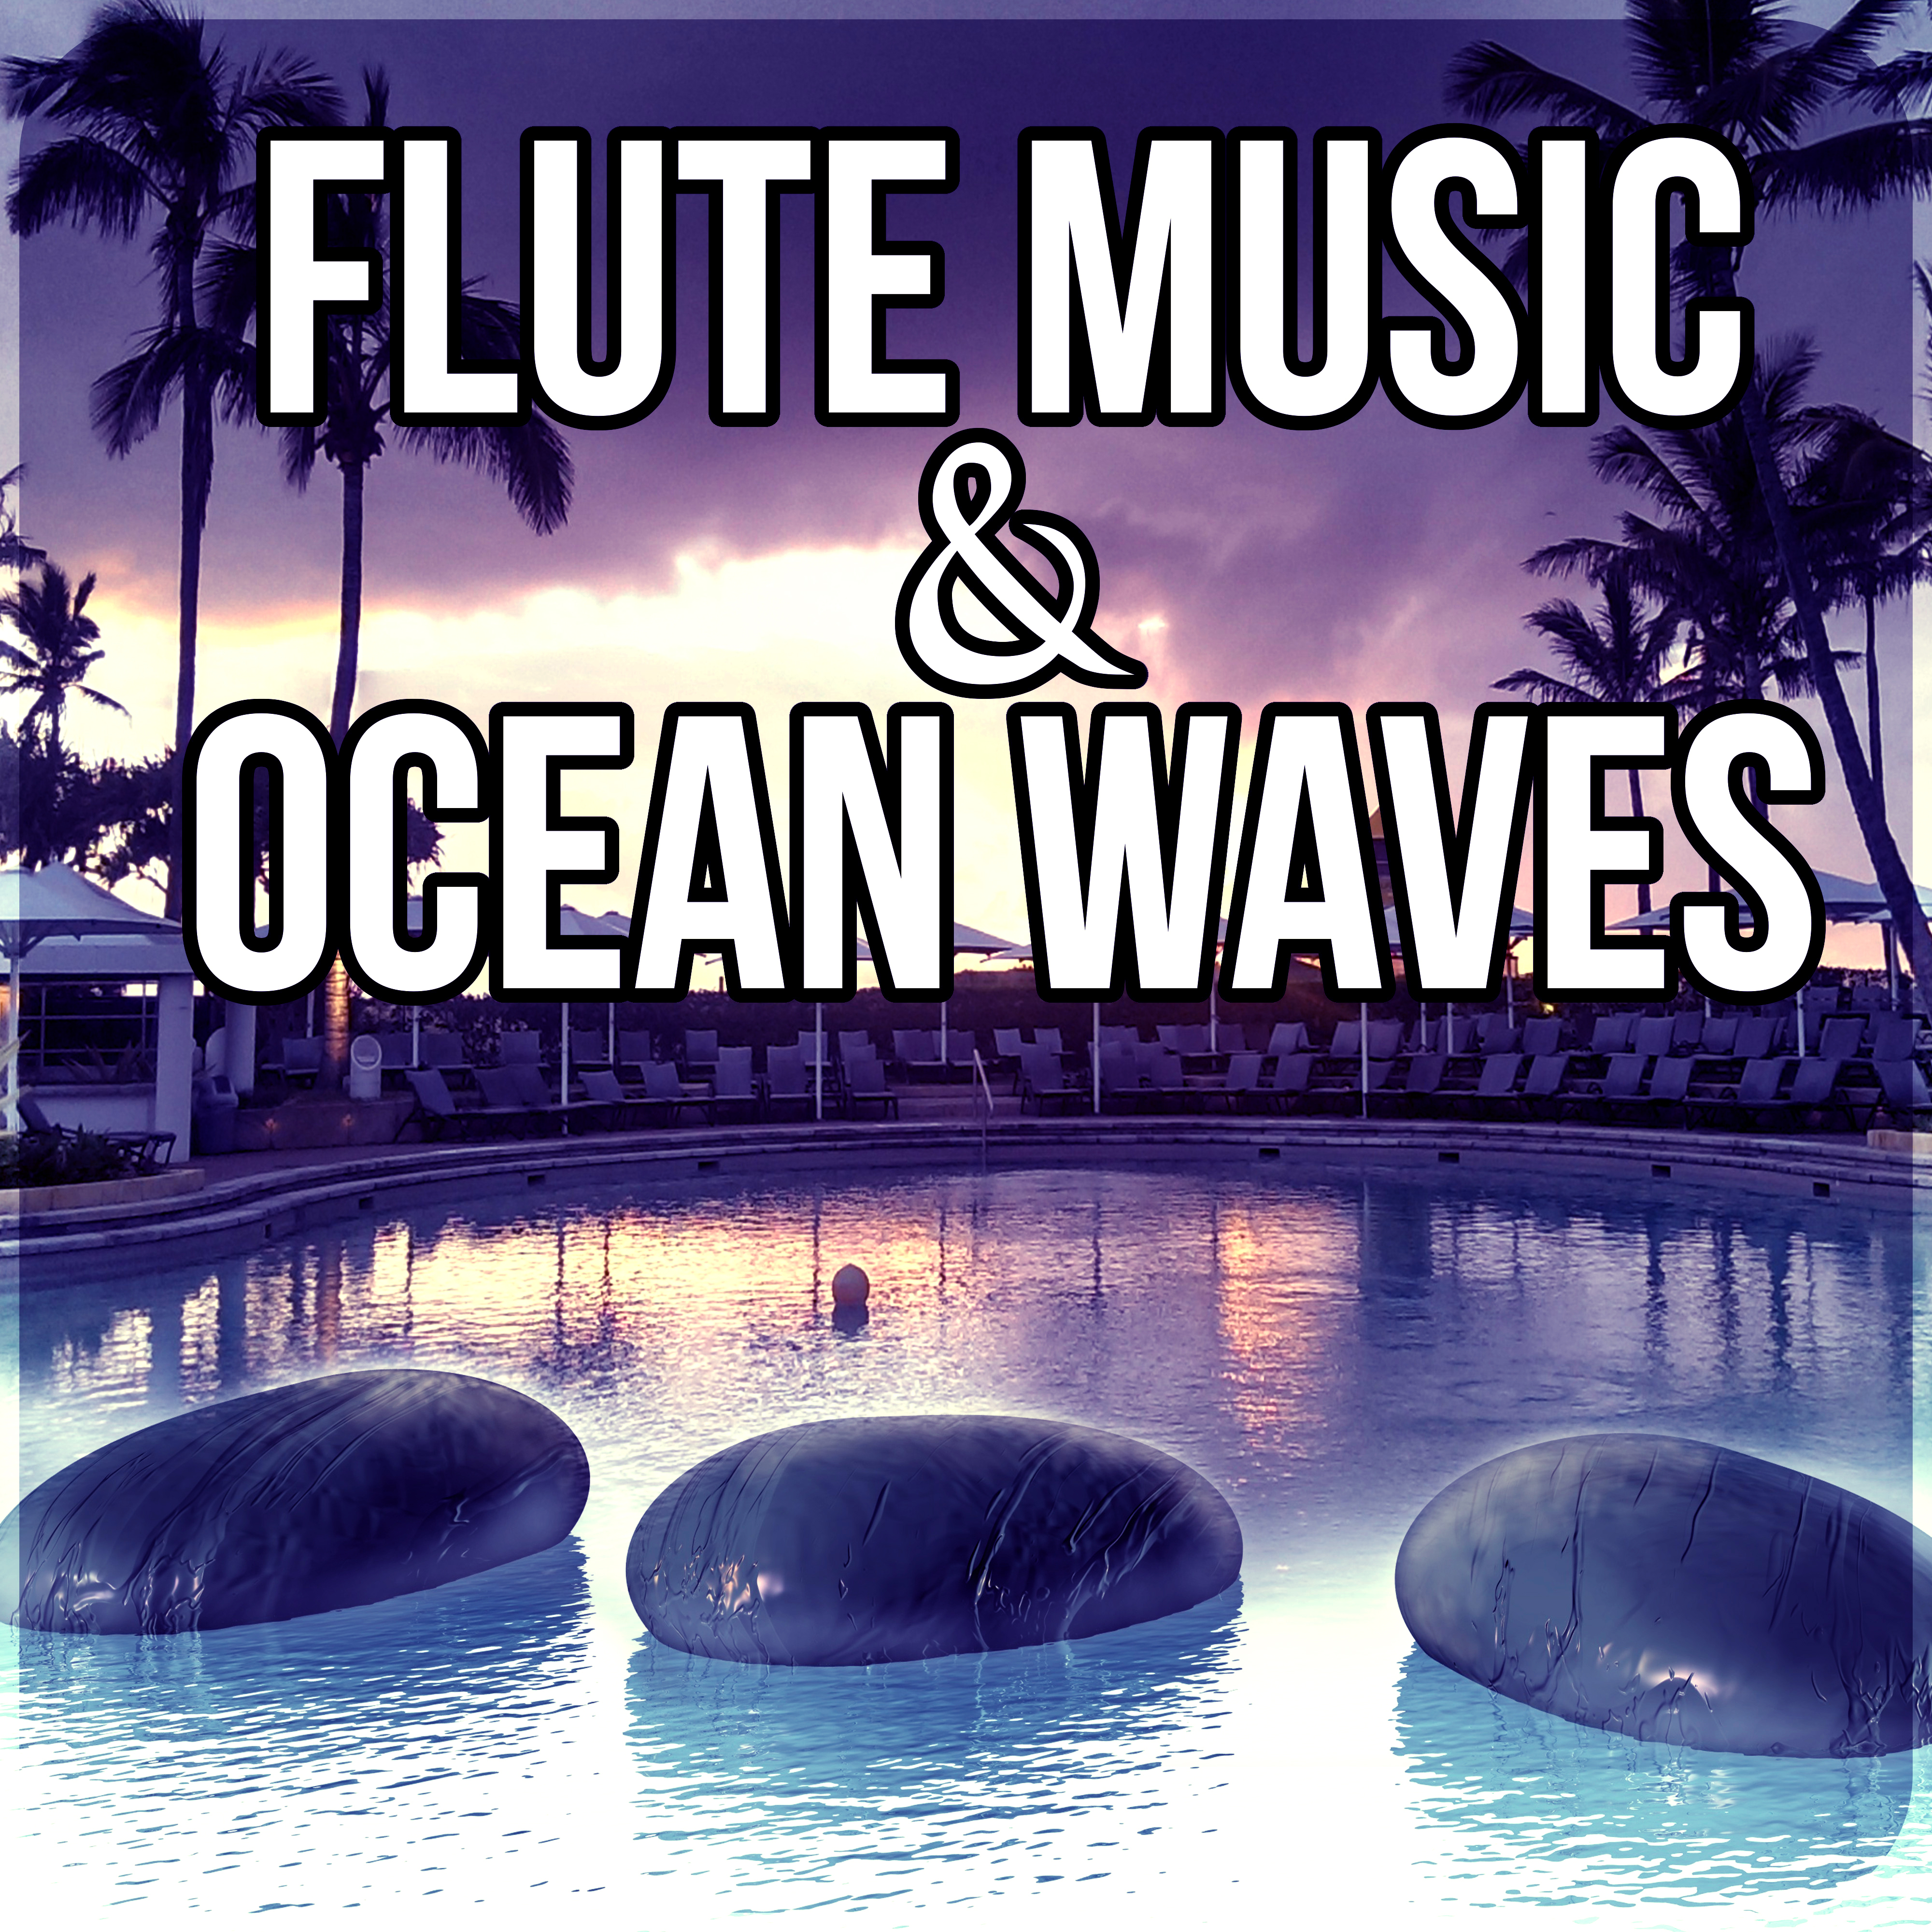 Flute Music & Ocean Waves - Serenity, Welness Nature Sounds, Music Therapy for the Heart, Sea Waves for Massage